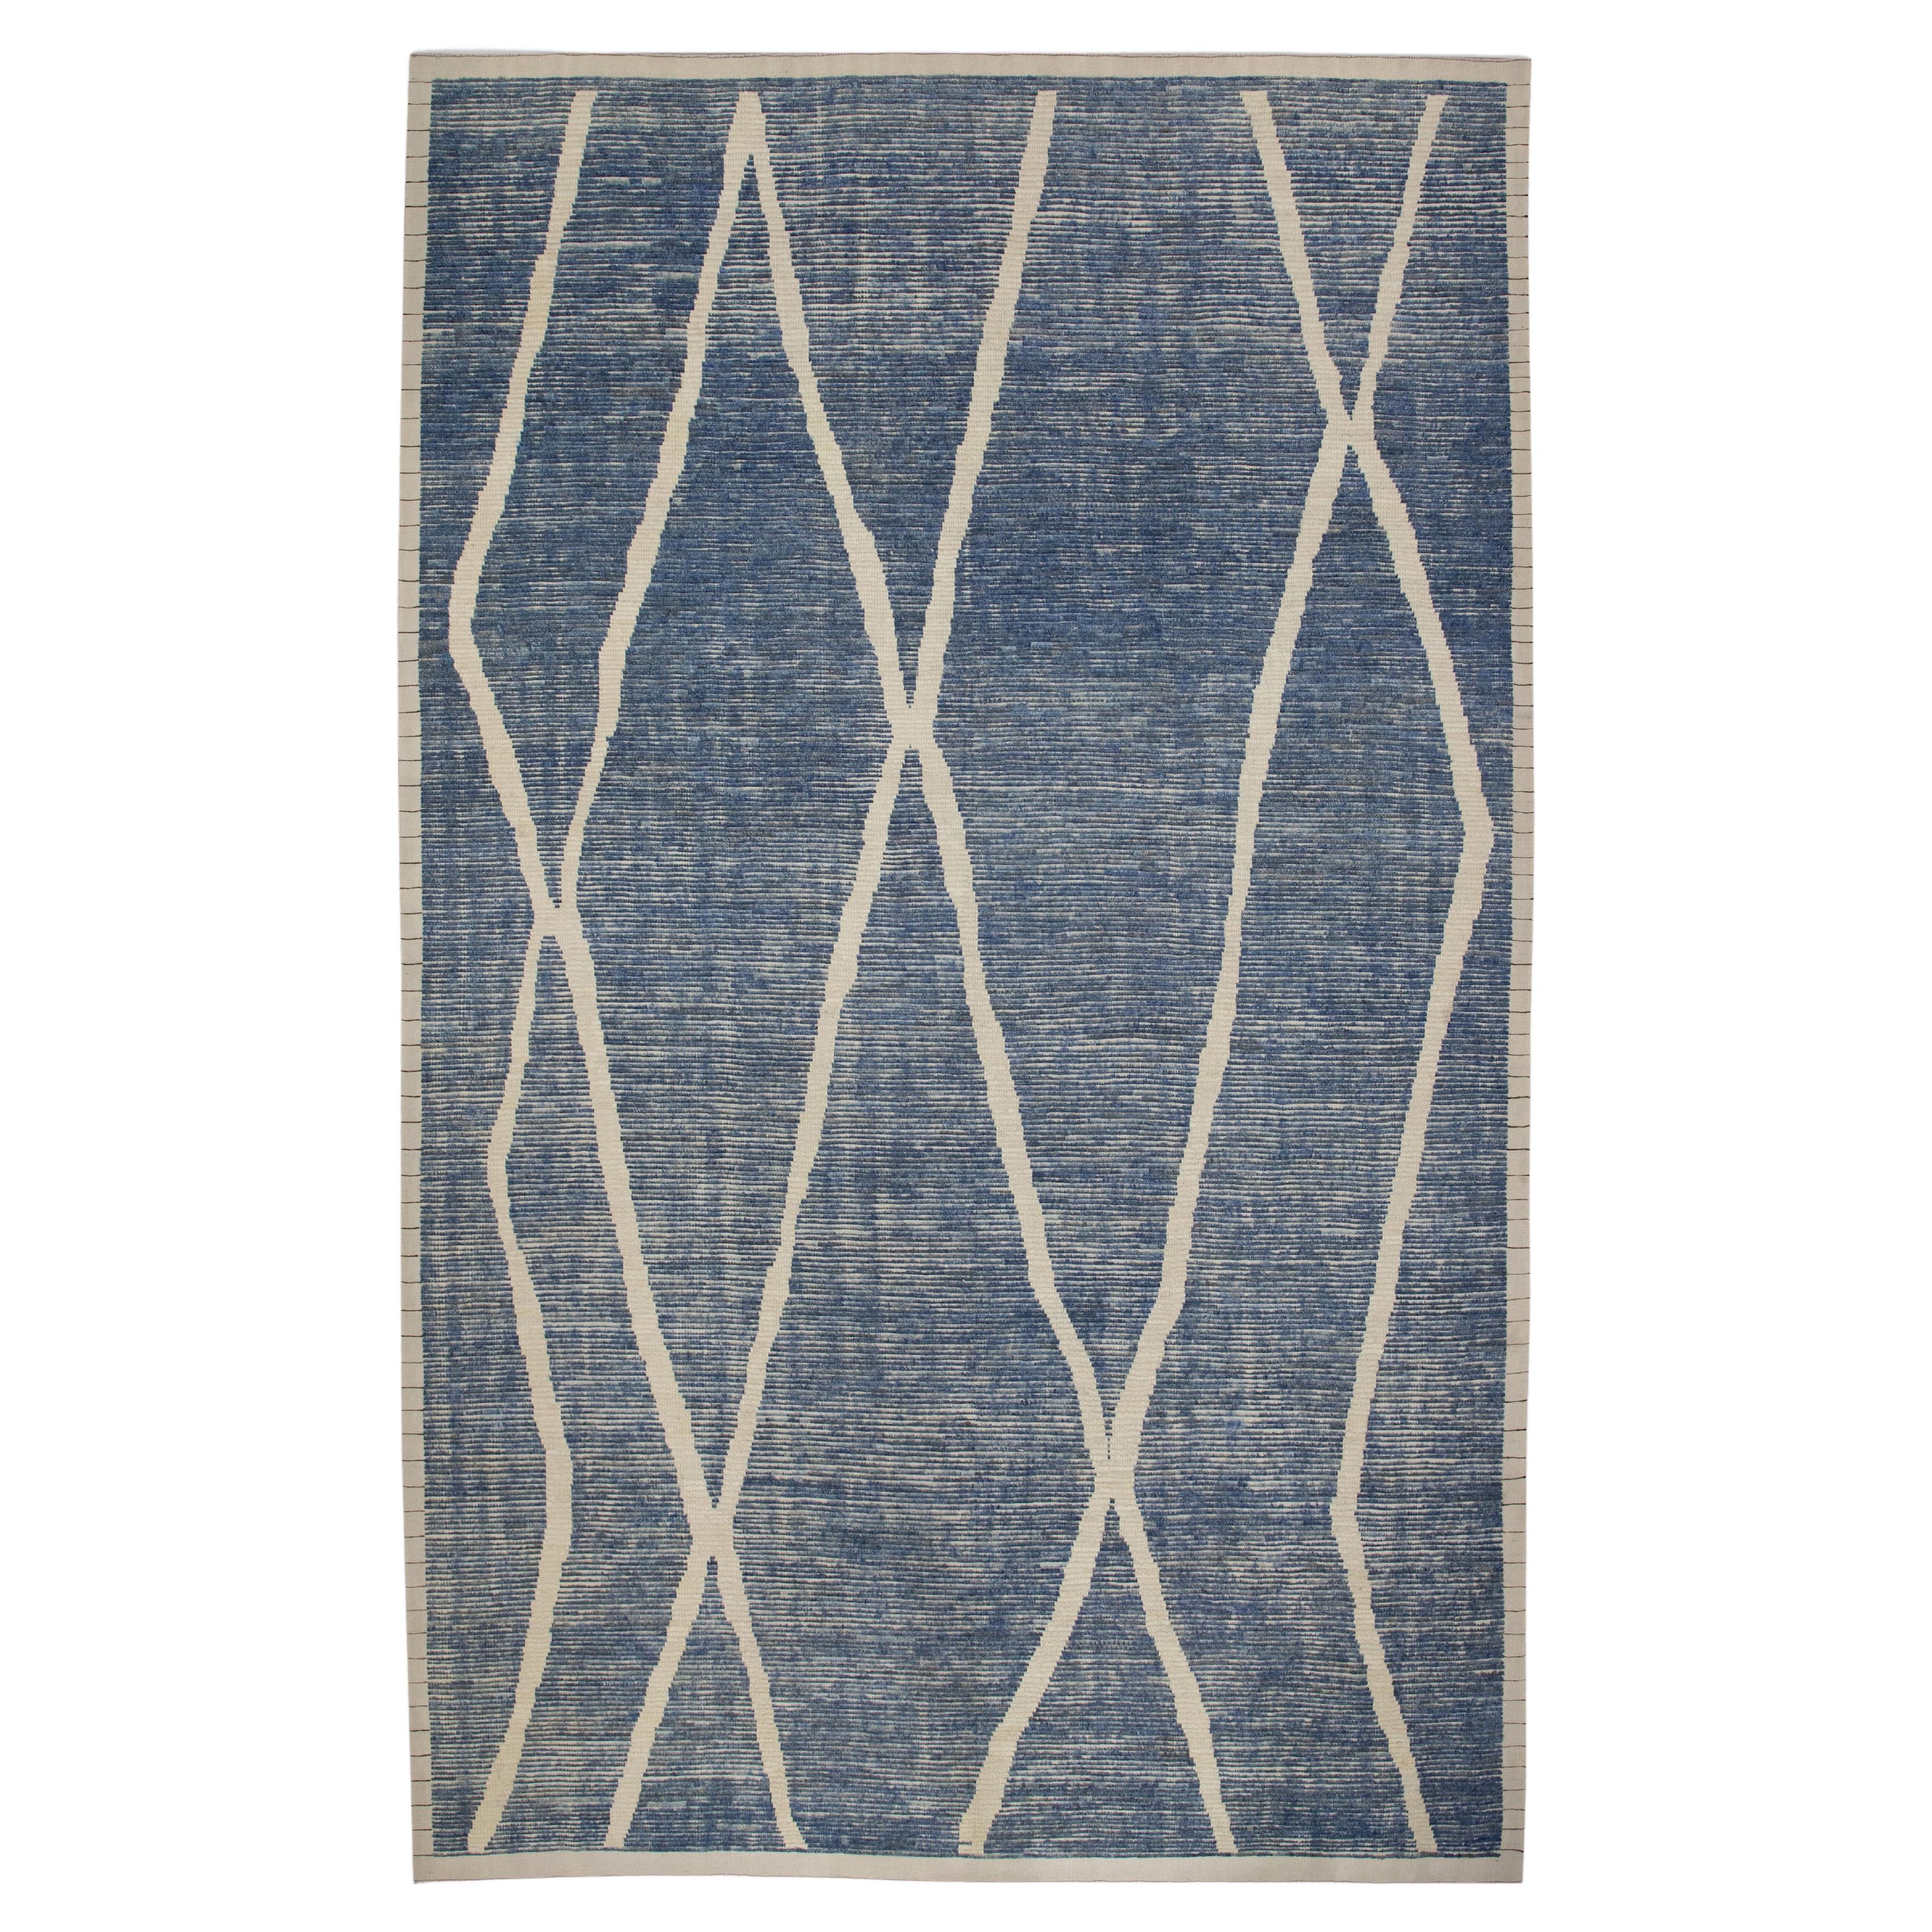 Blue & White 21st Century Modern Moroccan Style Wool Rug 9'9" X 14'5" For Sale